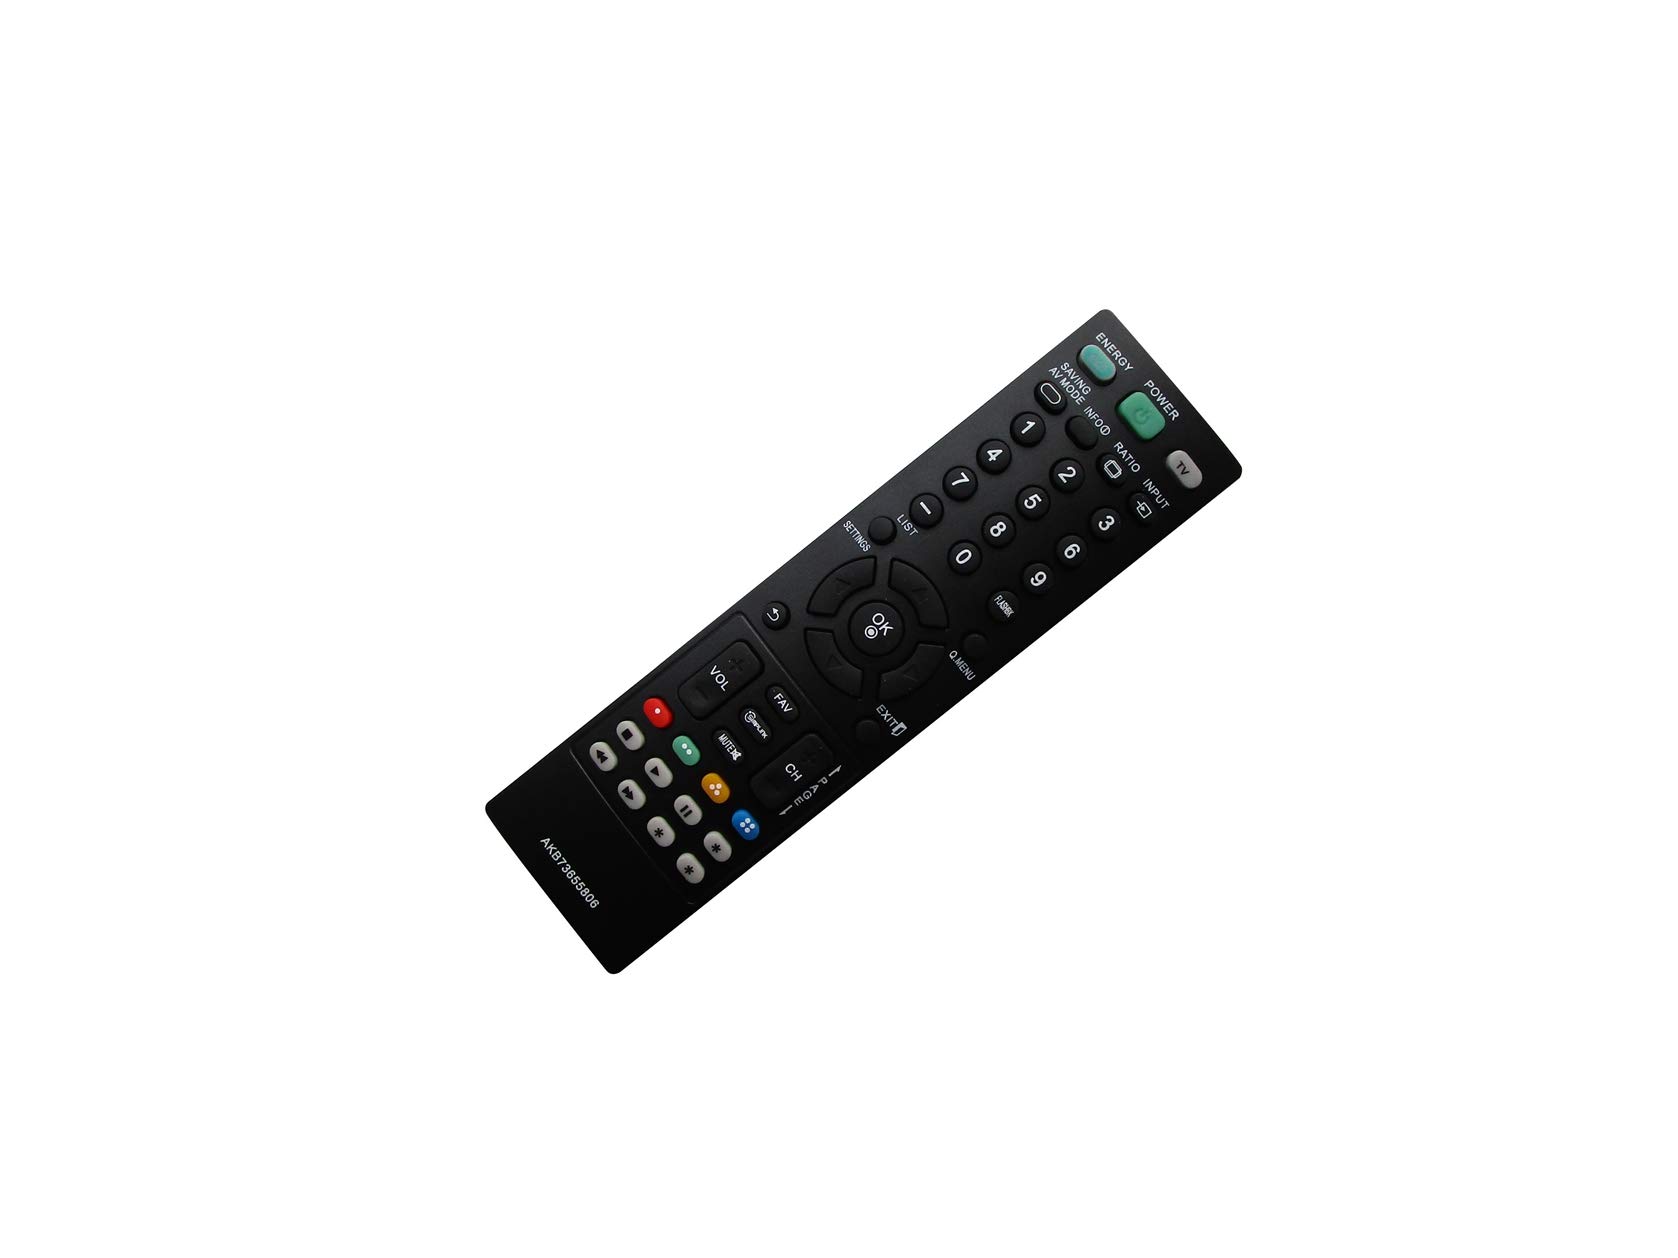 HCDZ Replacement Remote Control for LG AKB73655847 AKB73655848 AGF76578736 AKB73655858 LED LCD HDTV TV